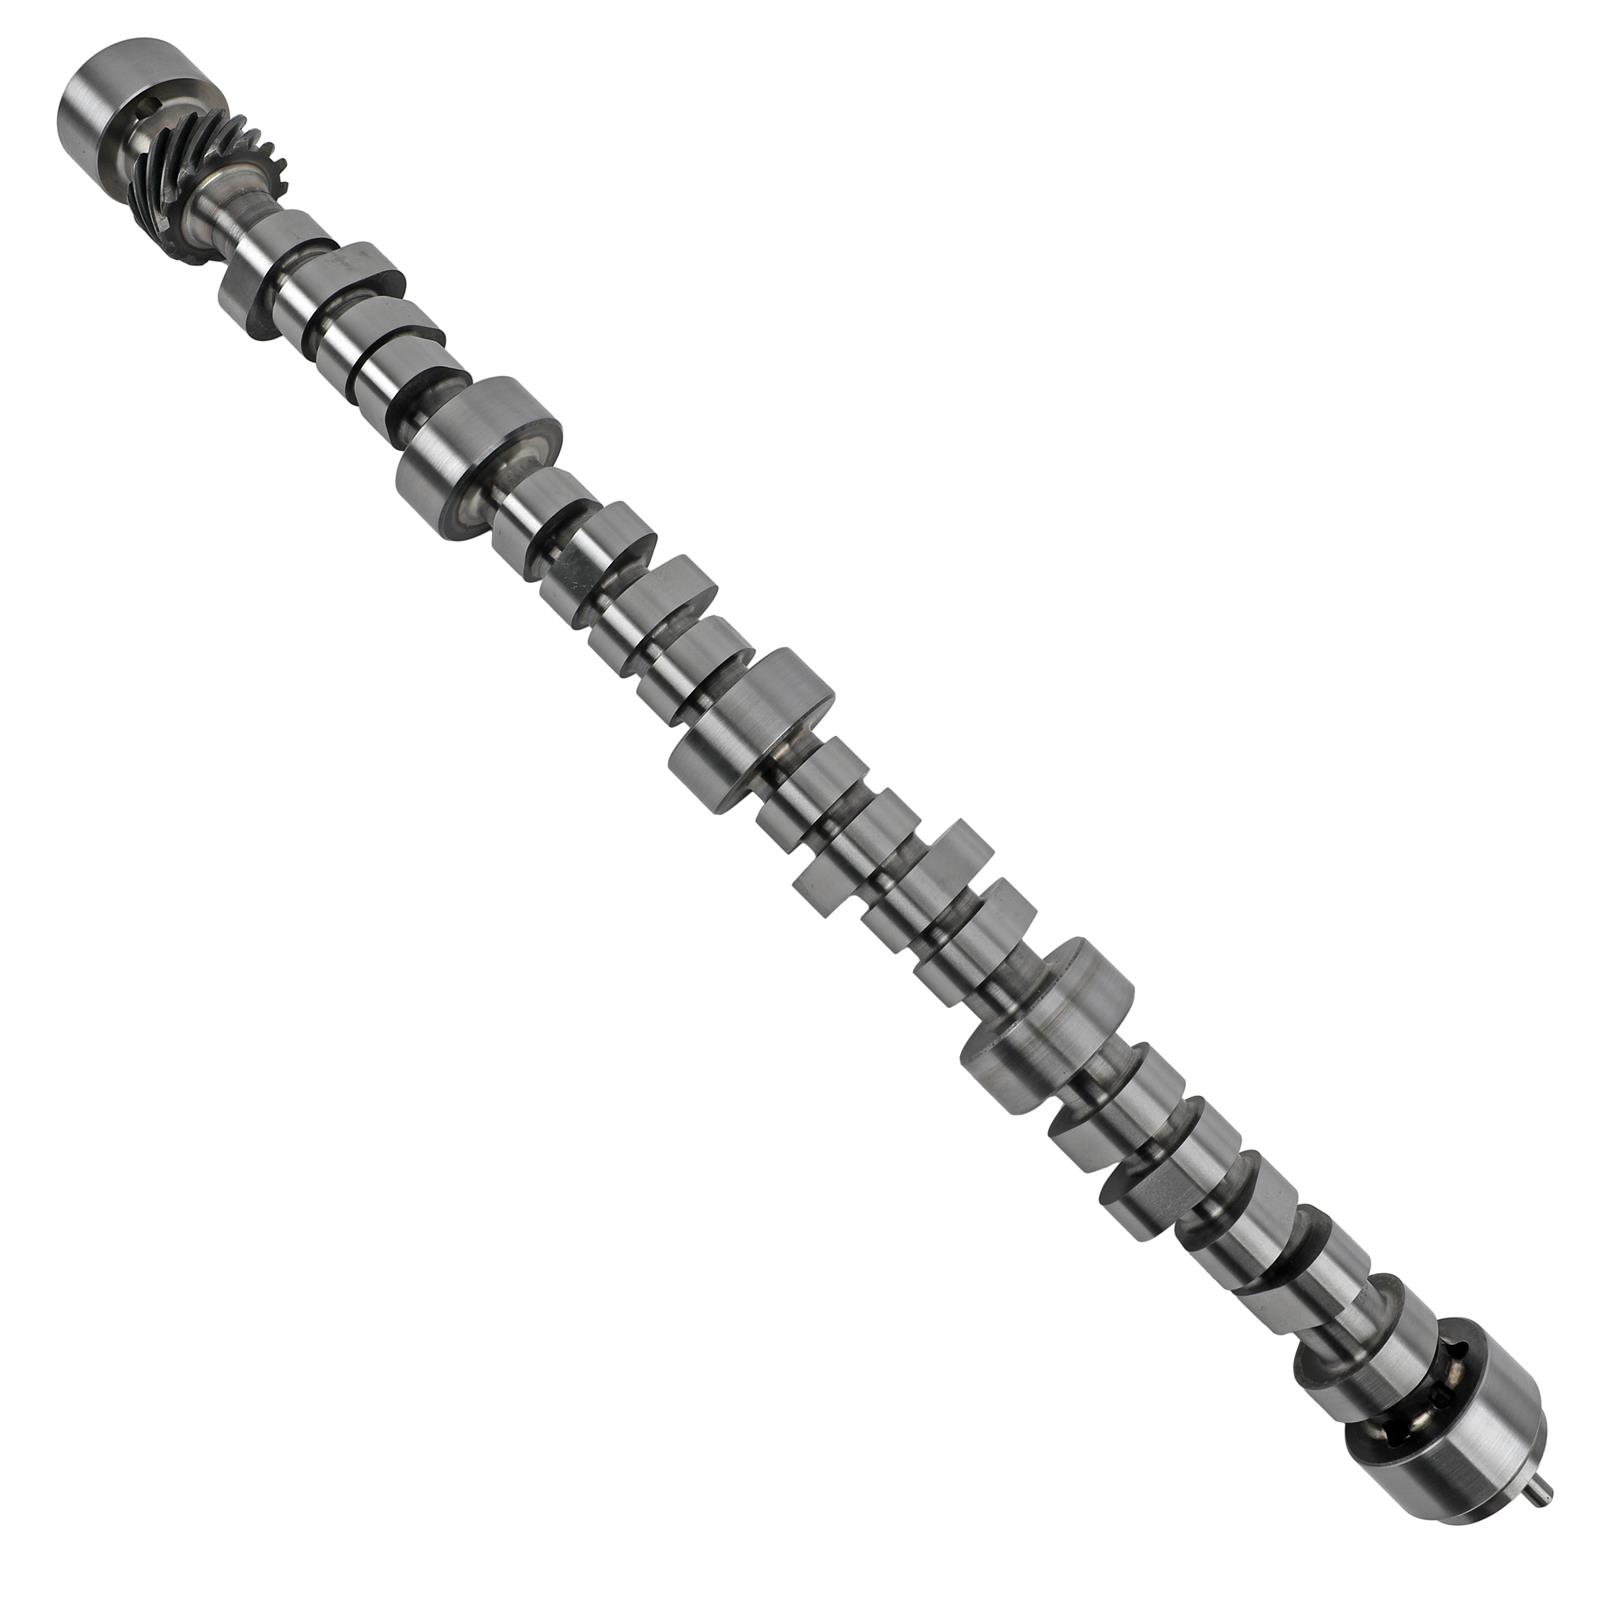 COMP Cams 08-413-8 COMP Cams Xtreme 4x4 Camshafts | Summit Racing